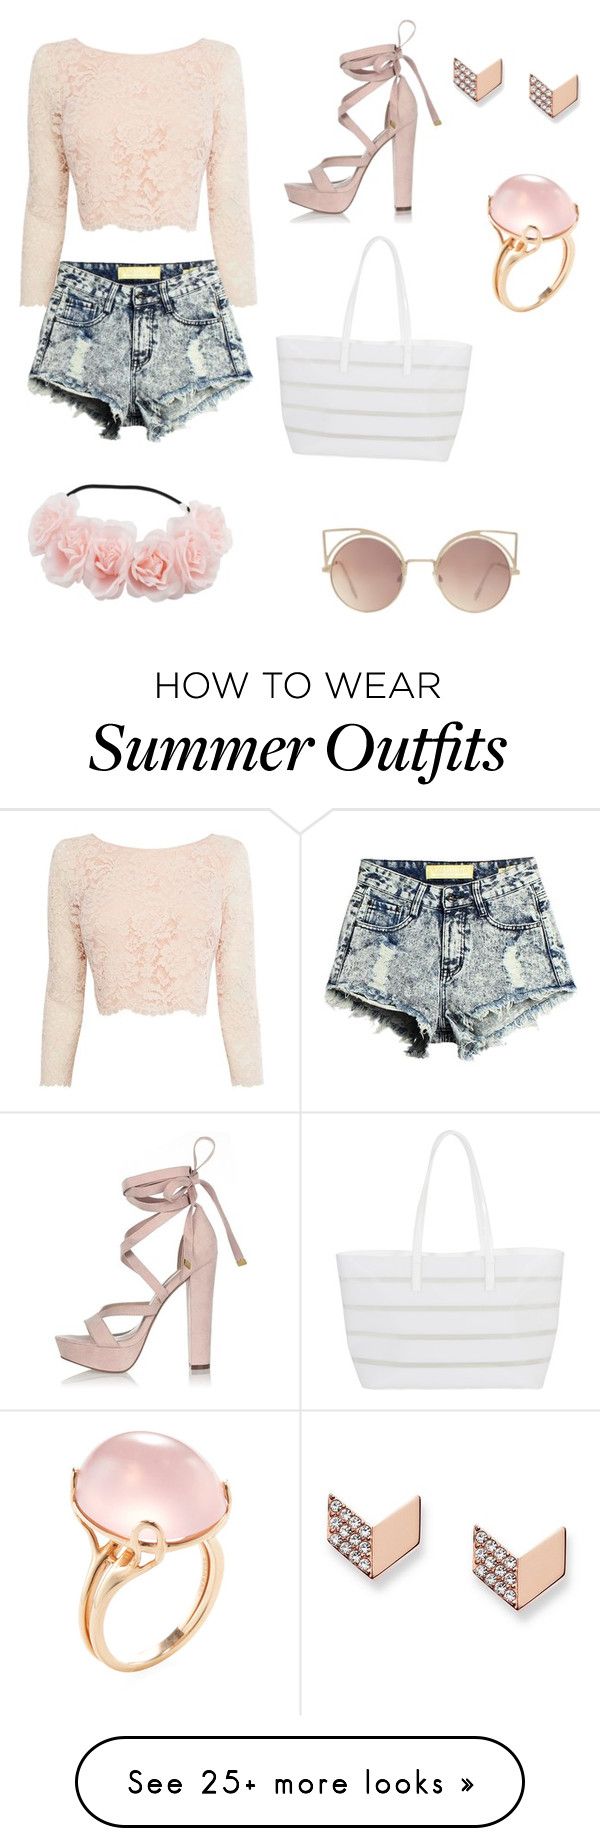 "Cute Summer Outfit" by kaylafayesmith on Polyvore featuring Coast, Ri...